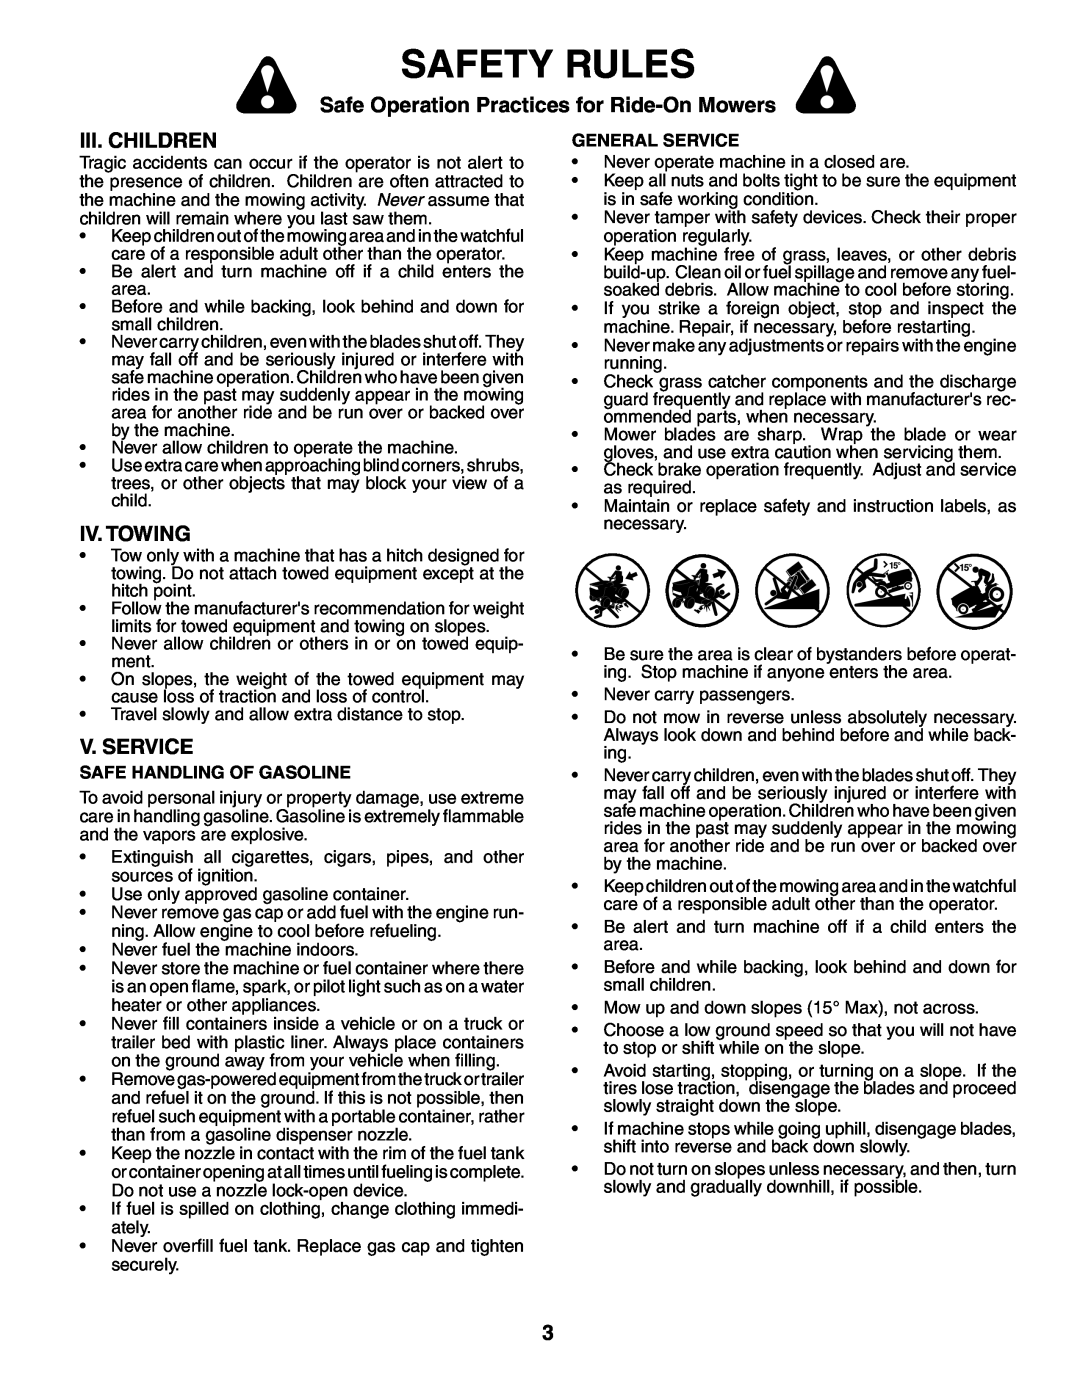 Weed Eater HD13538 manual Iii. Children, Iv. Towing, V. Service, Safety Rules, Safe Operation Practices for Ride-OnMowers 